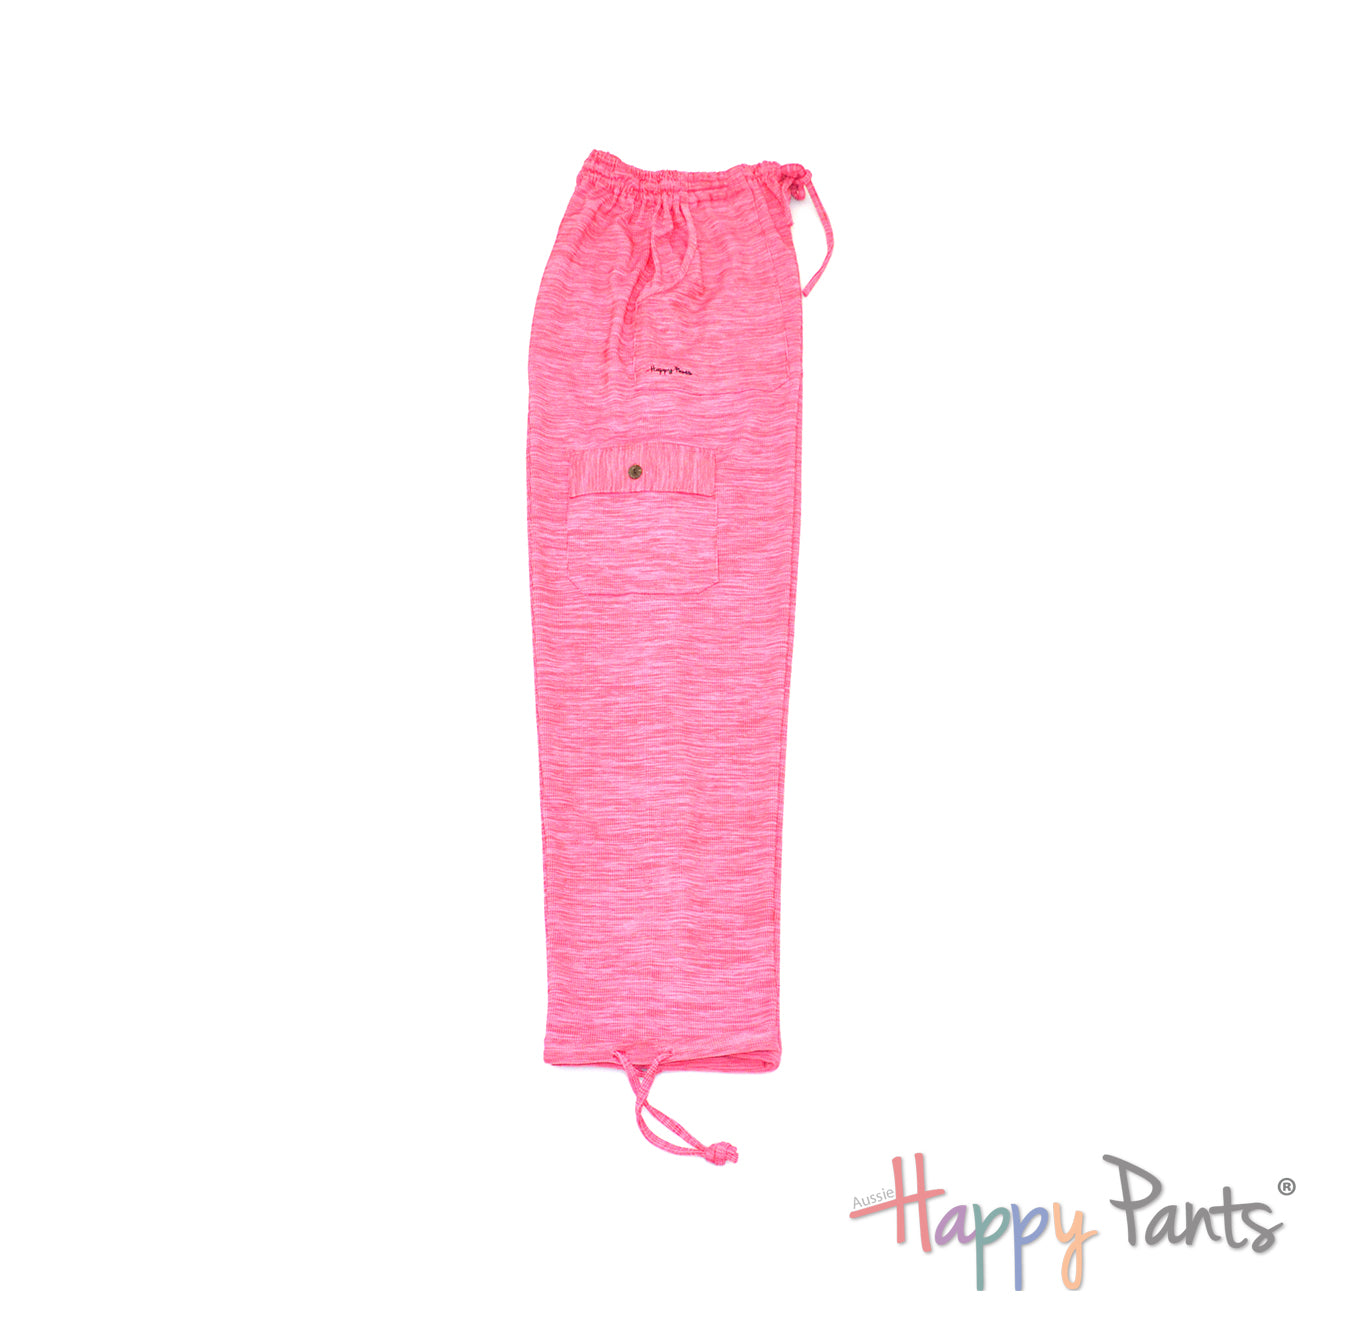 Pink Trousers for ladies with elastic waist holiday pants resort wear Australia comfy joggers